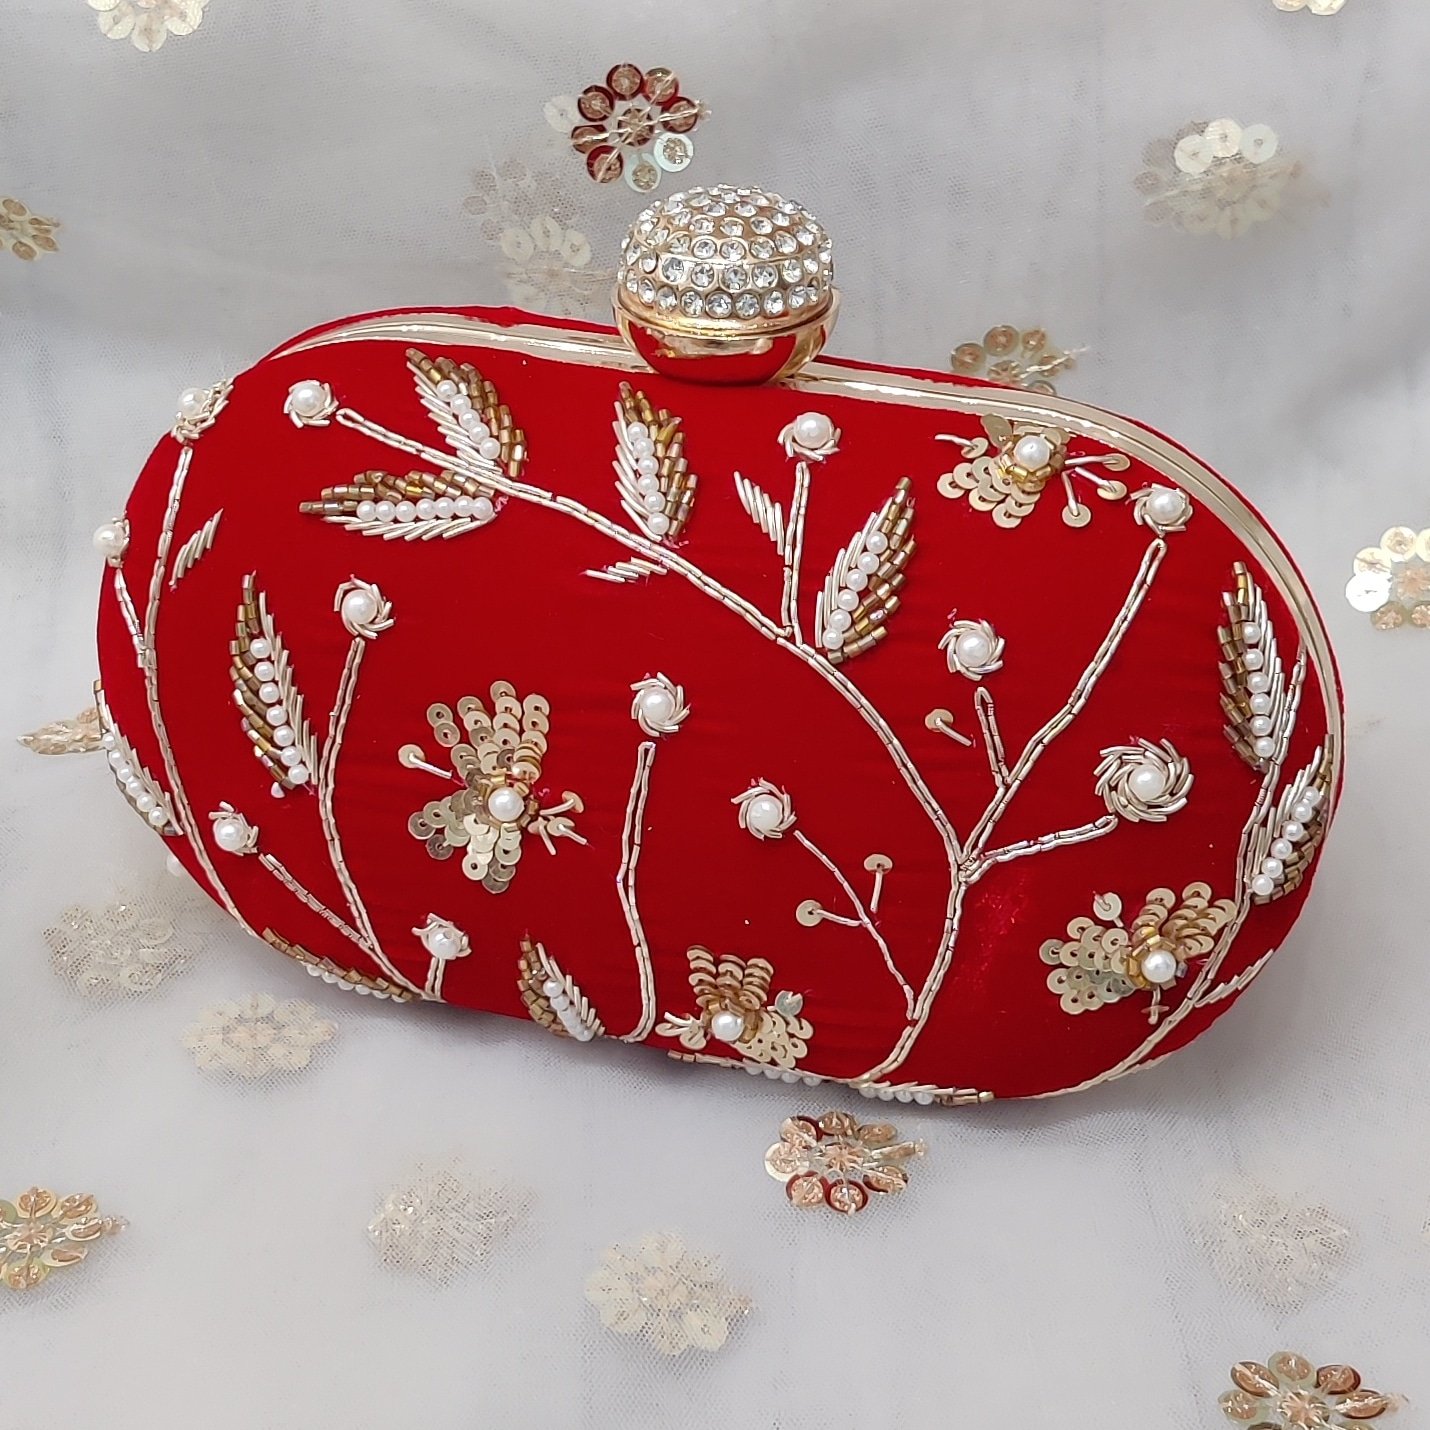 Clutch Bags & Evening Bags for Special Occasions | Accessorize UK